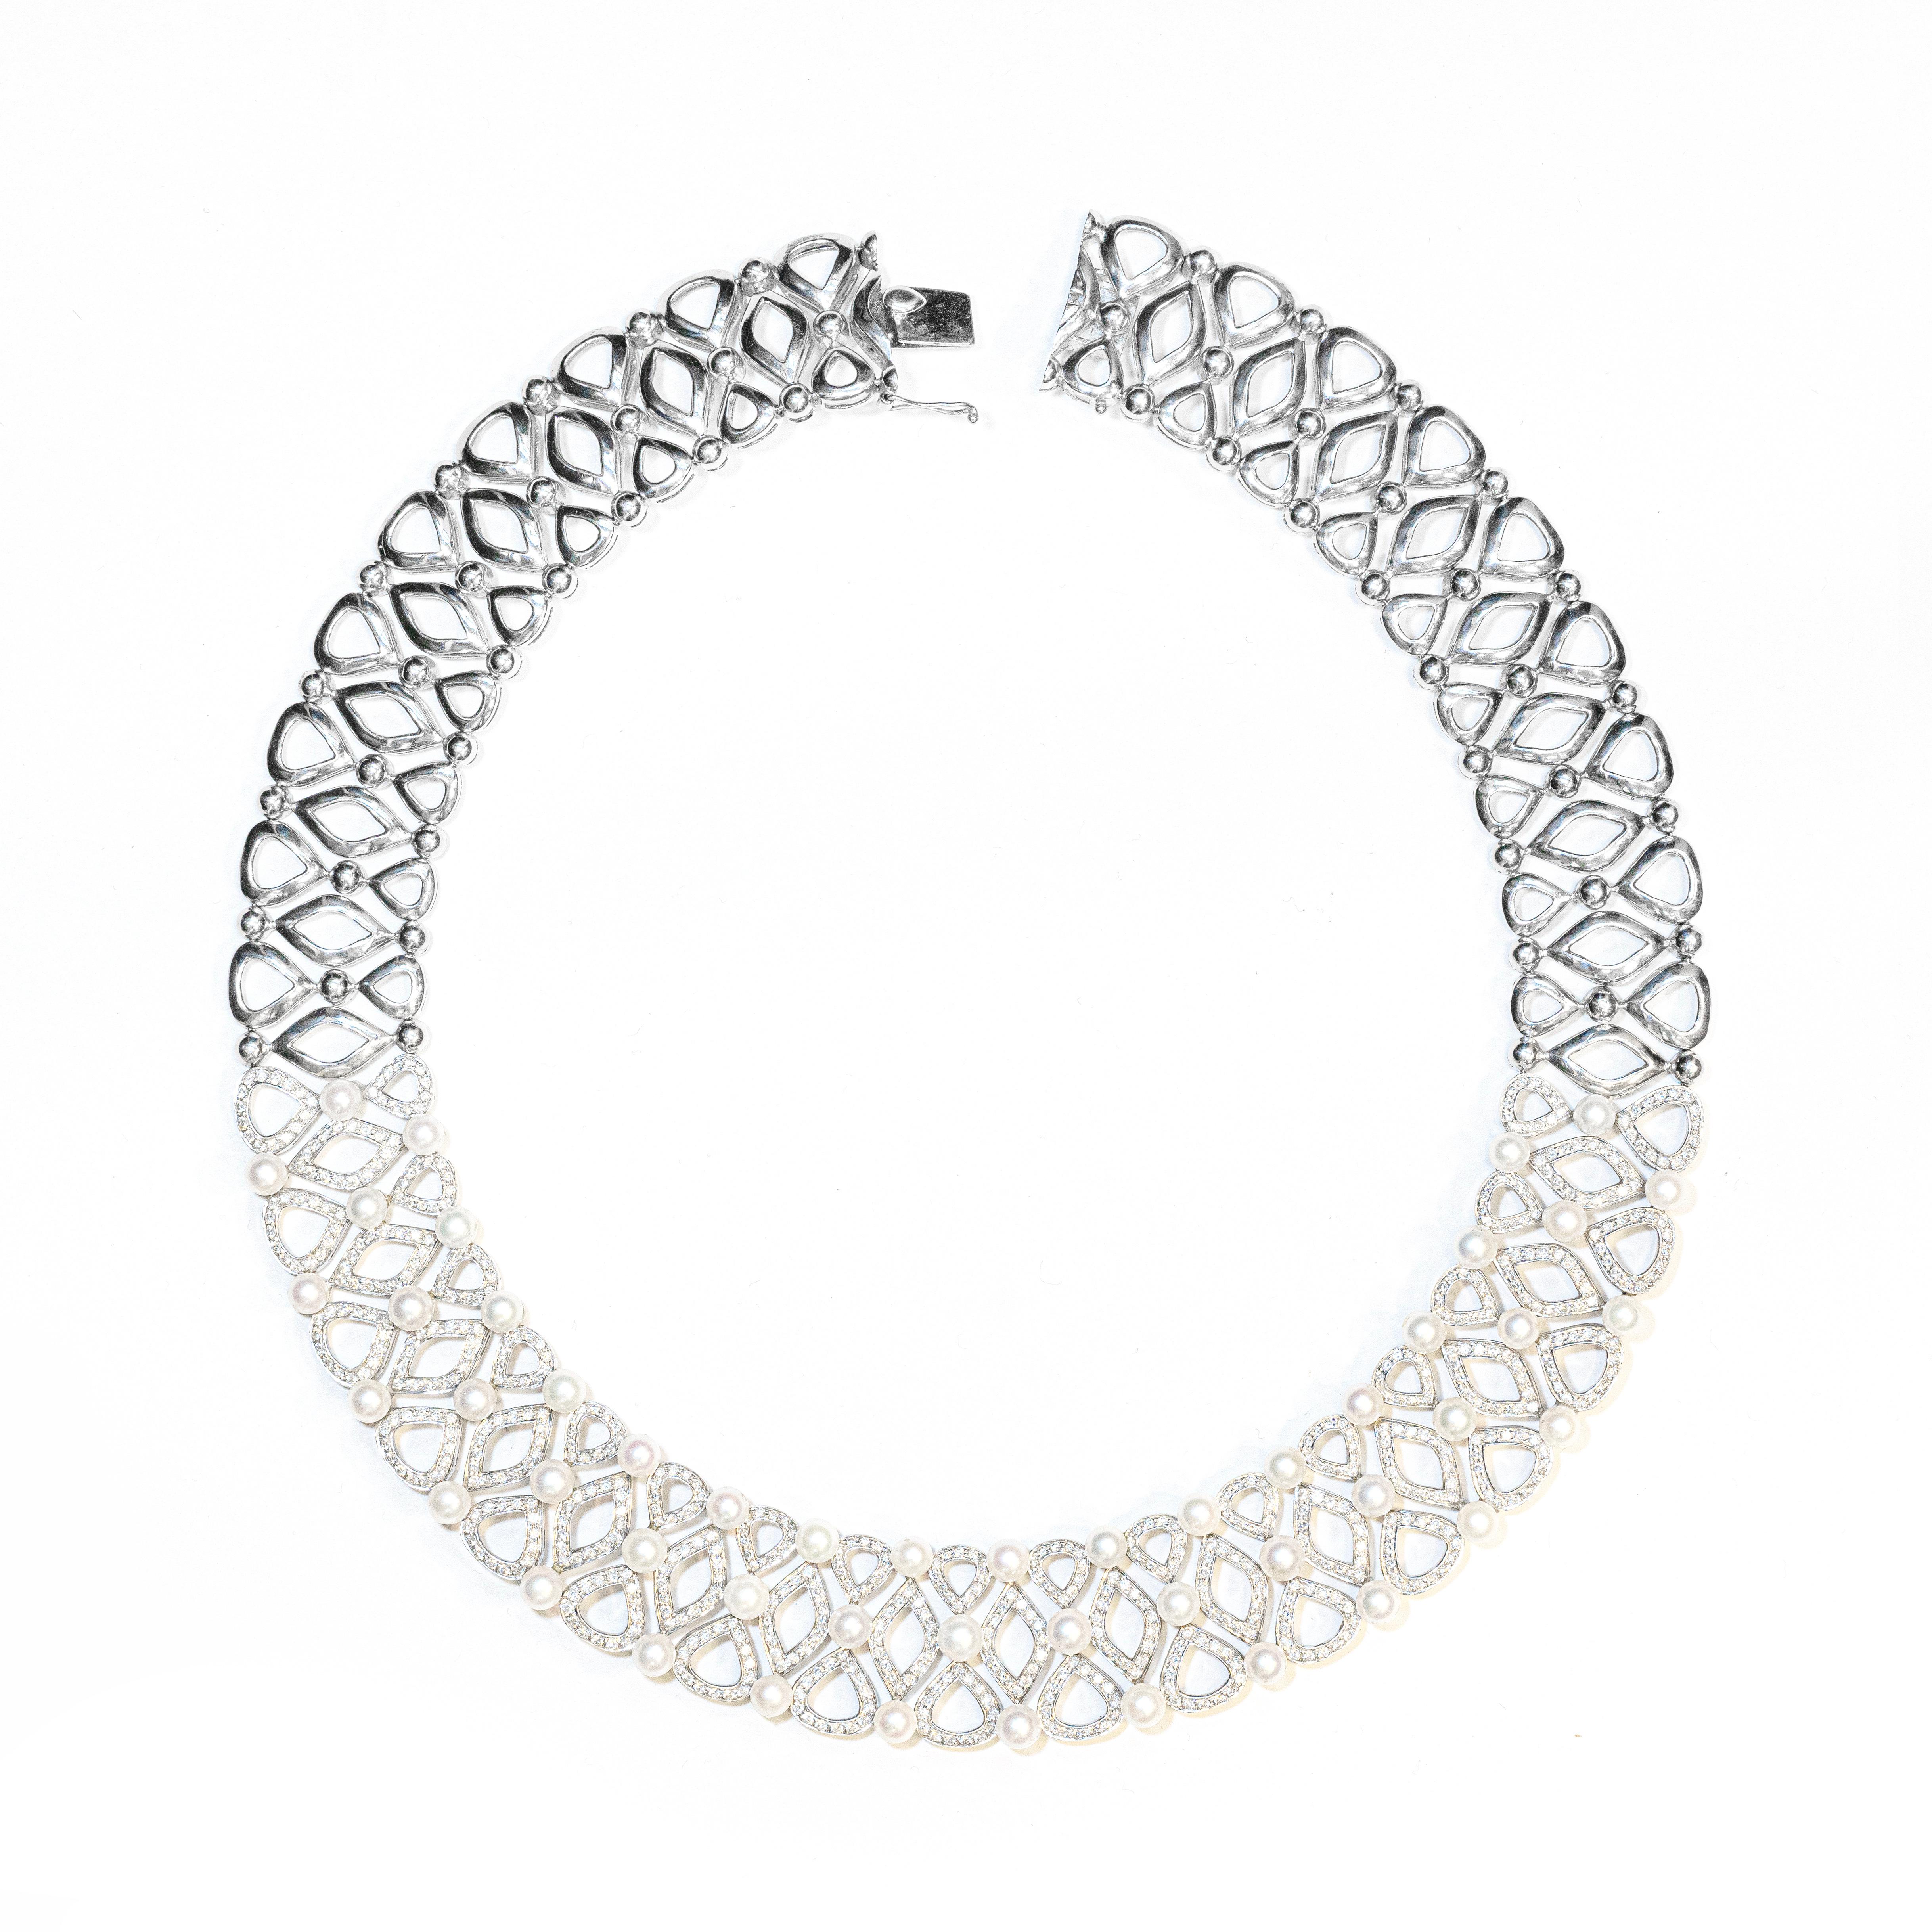 Resplendent and bold, this wonderful 18 carat white gold collar necklace features an intricate open work design beautifully inlaid with round brilliant cut diamonds on its frontal half, weighing 10.72ct in total. Elegant details are added to the